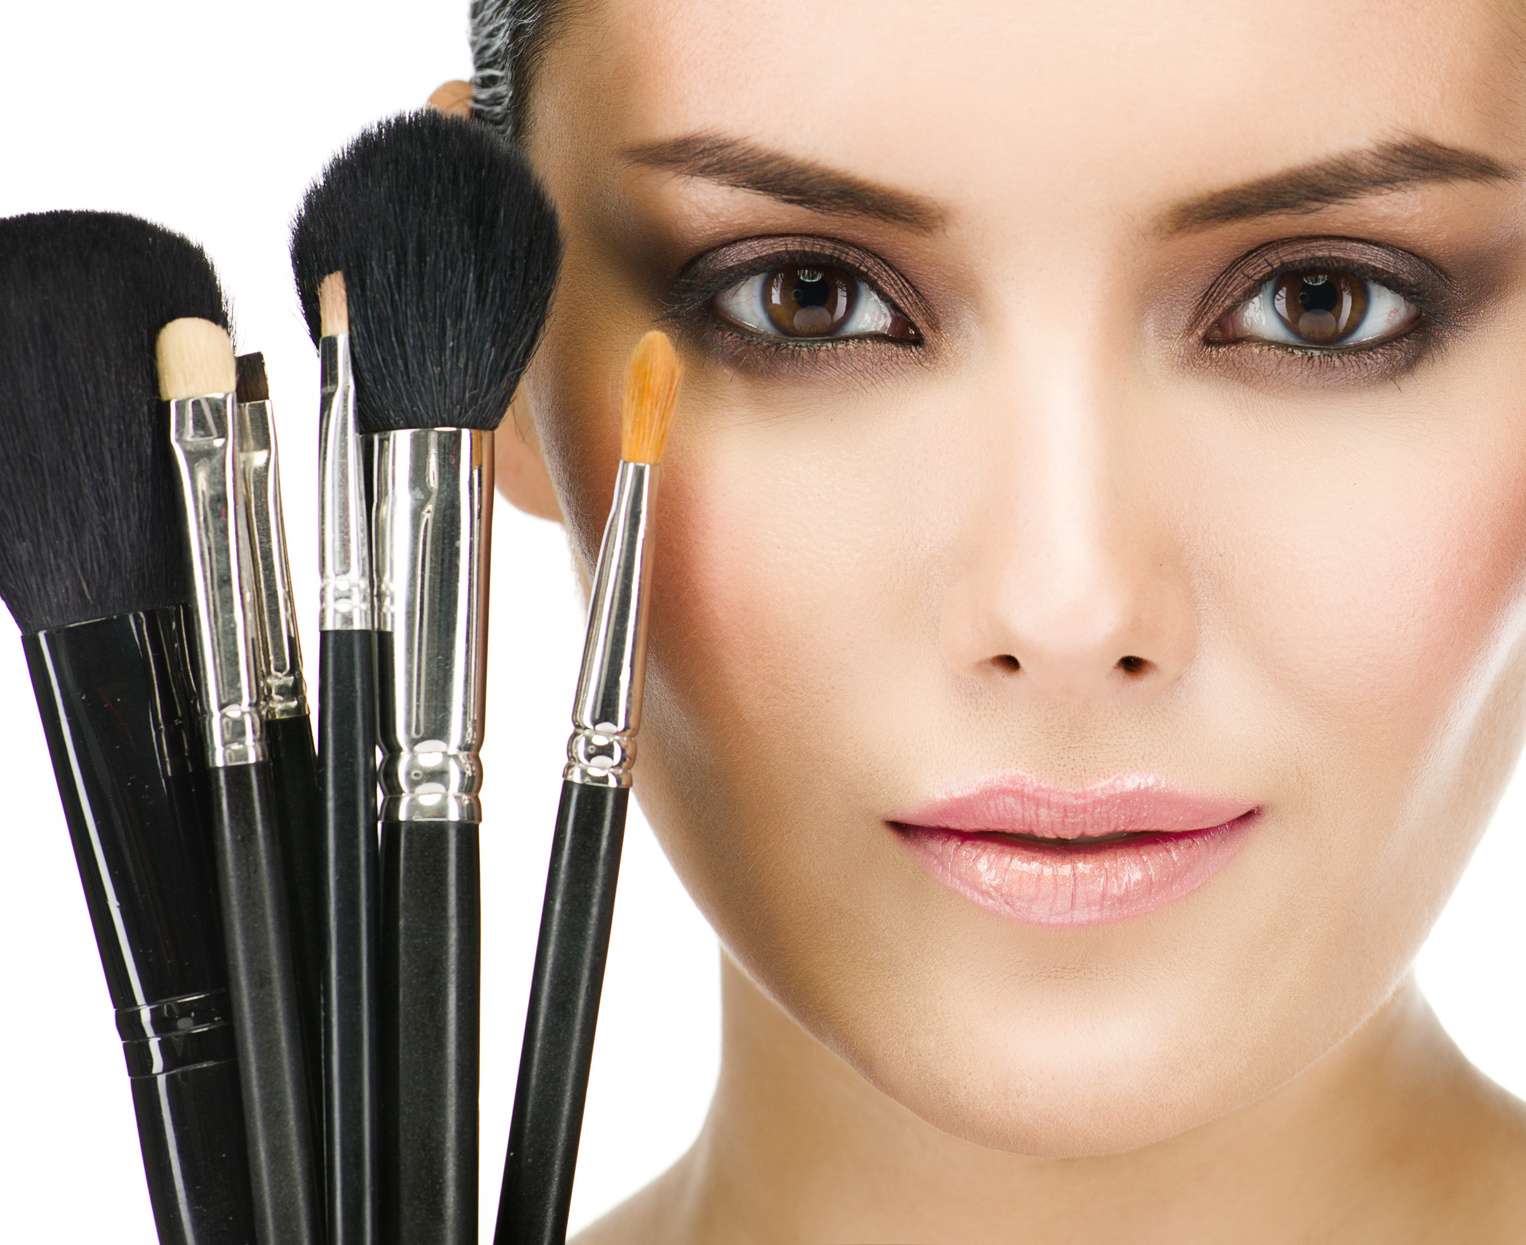 7 Tips for Eye Safety When Wearing Makeup